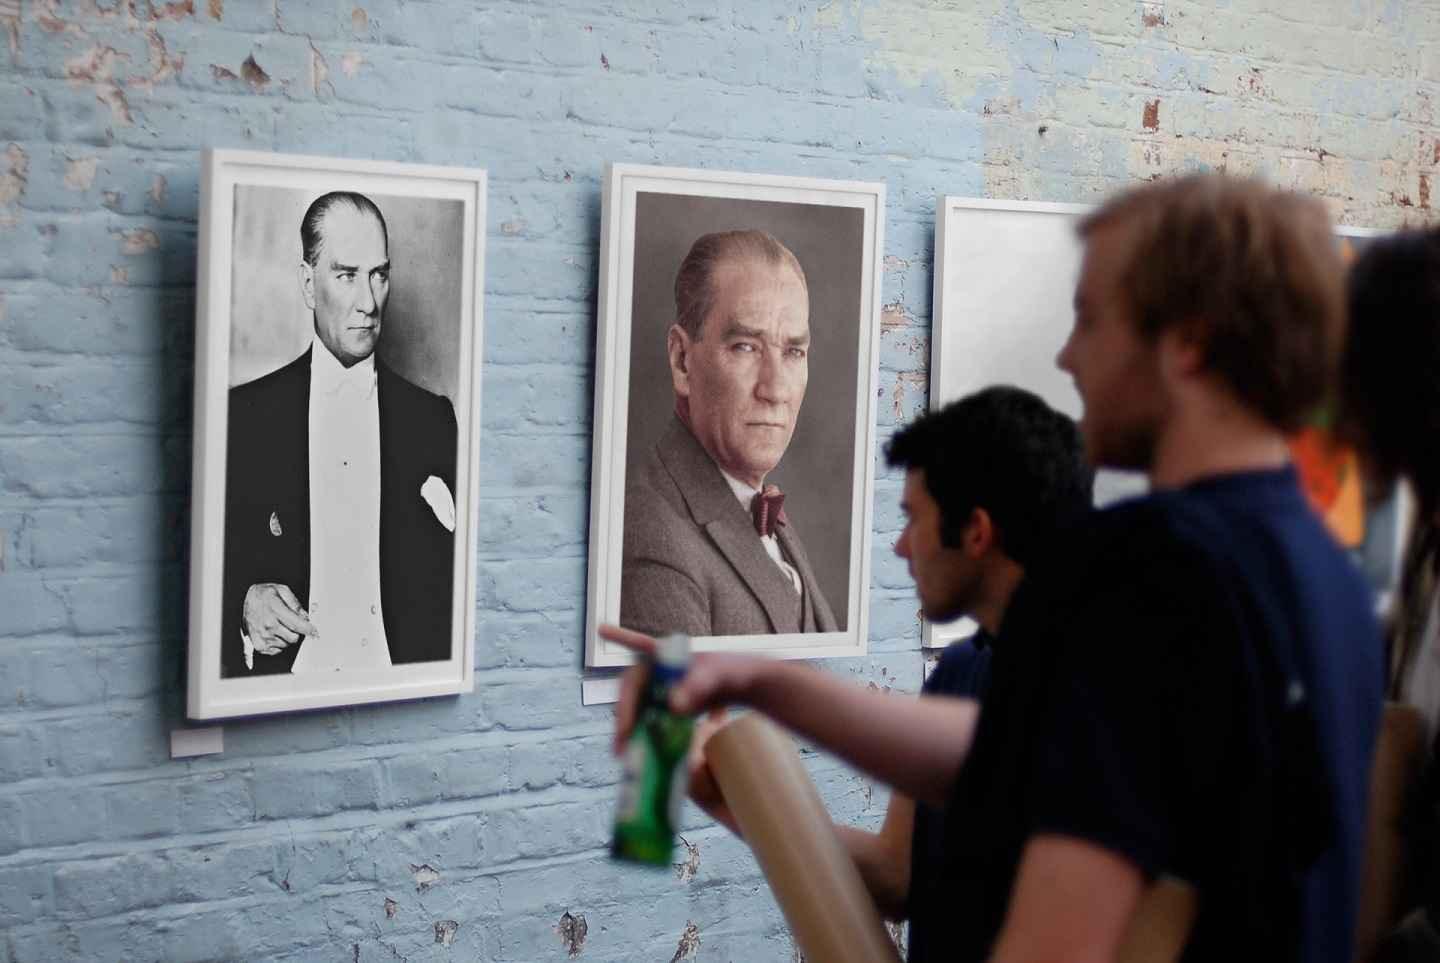 Mustafa Kemal Ataturk print displayed in an art gallery with people talking about it.